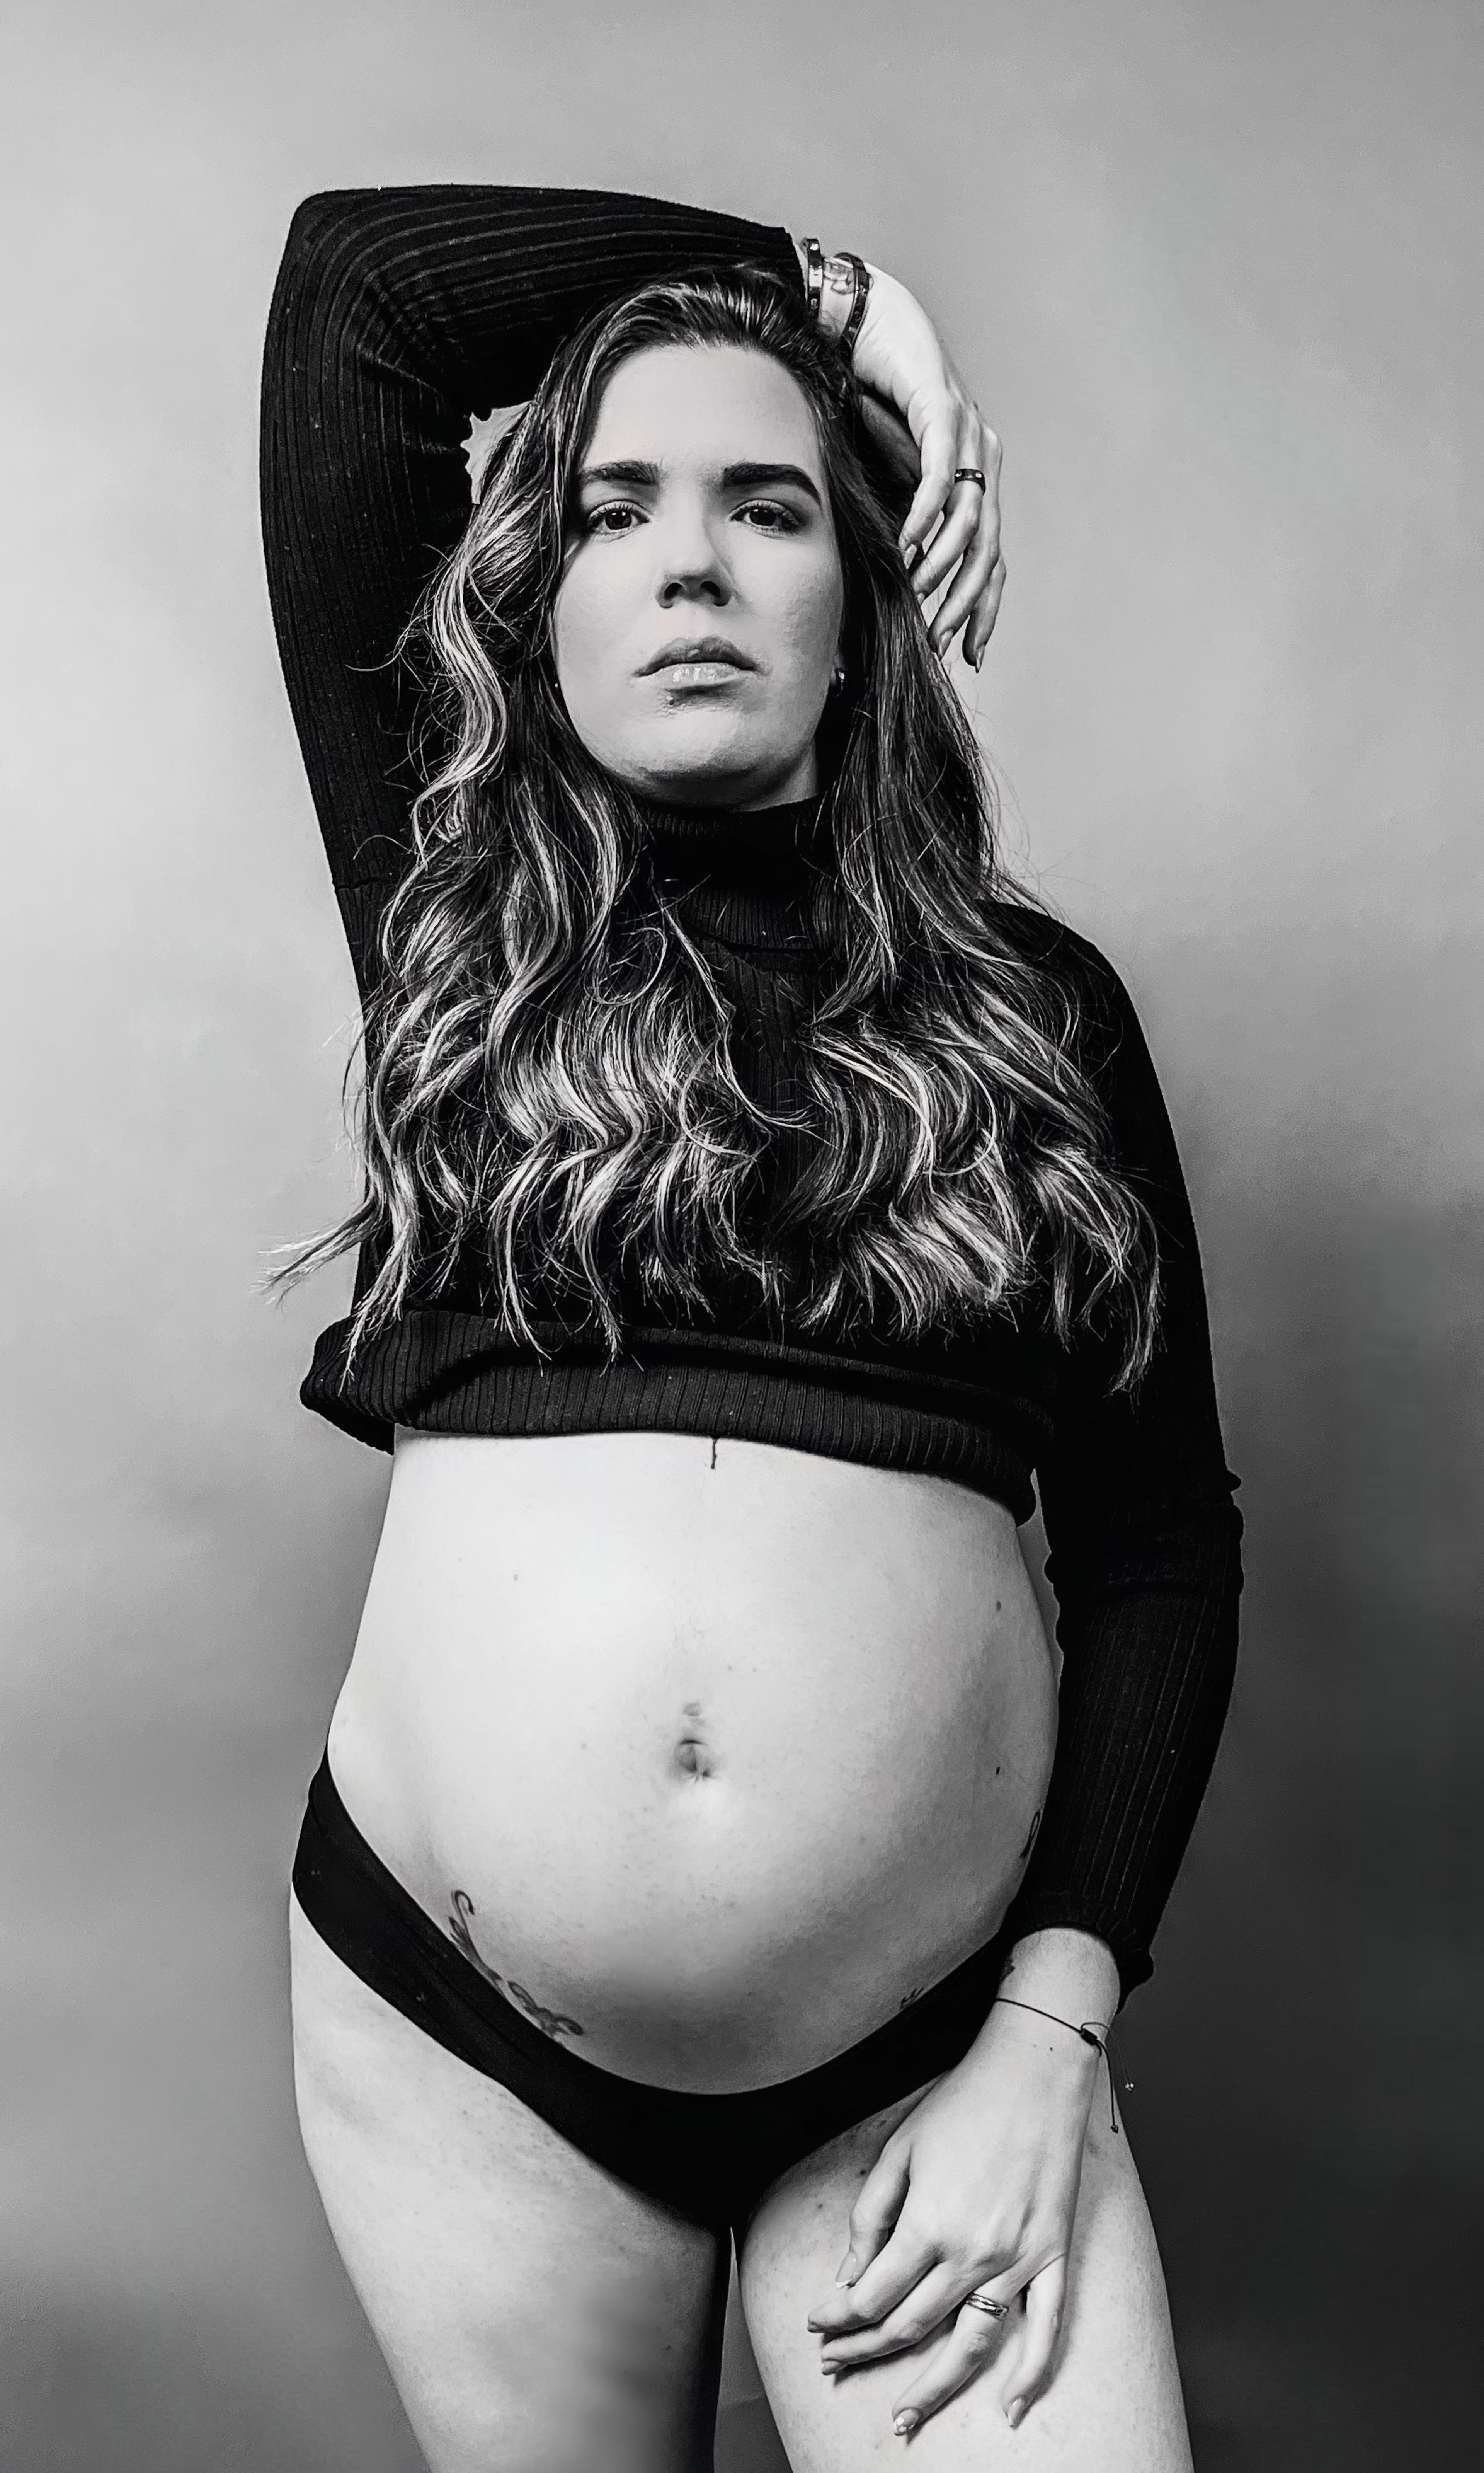 A black and white maternity photoshoot of a pregnant woman.